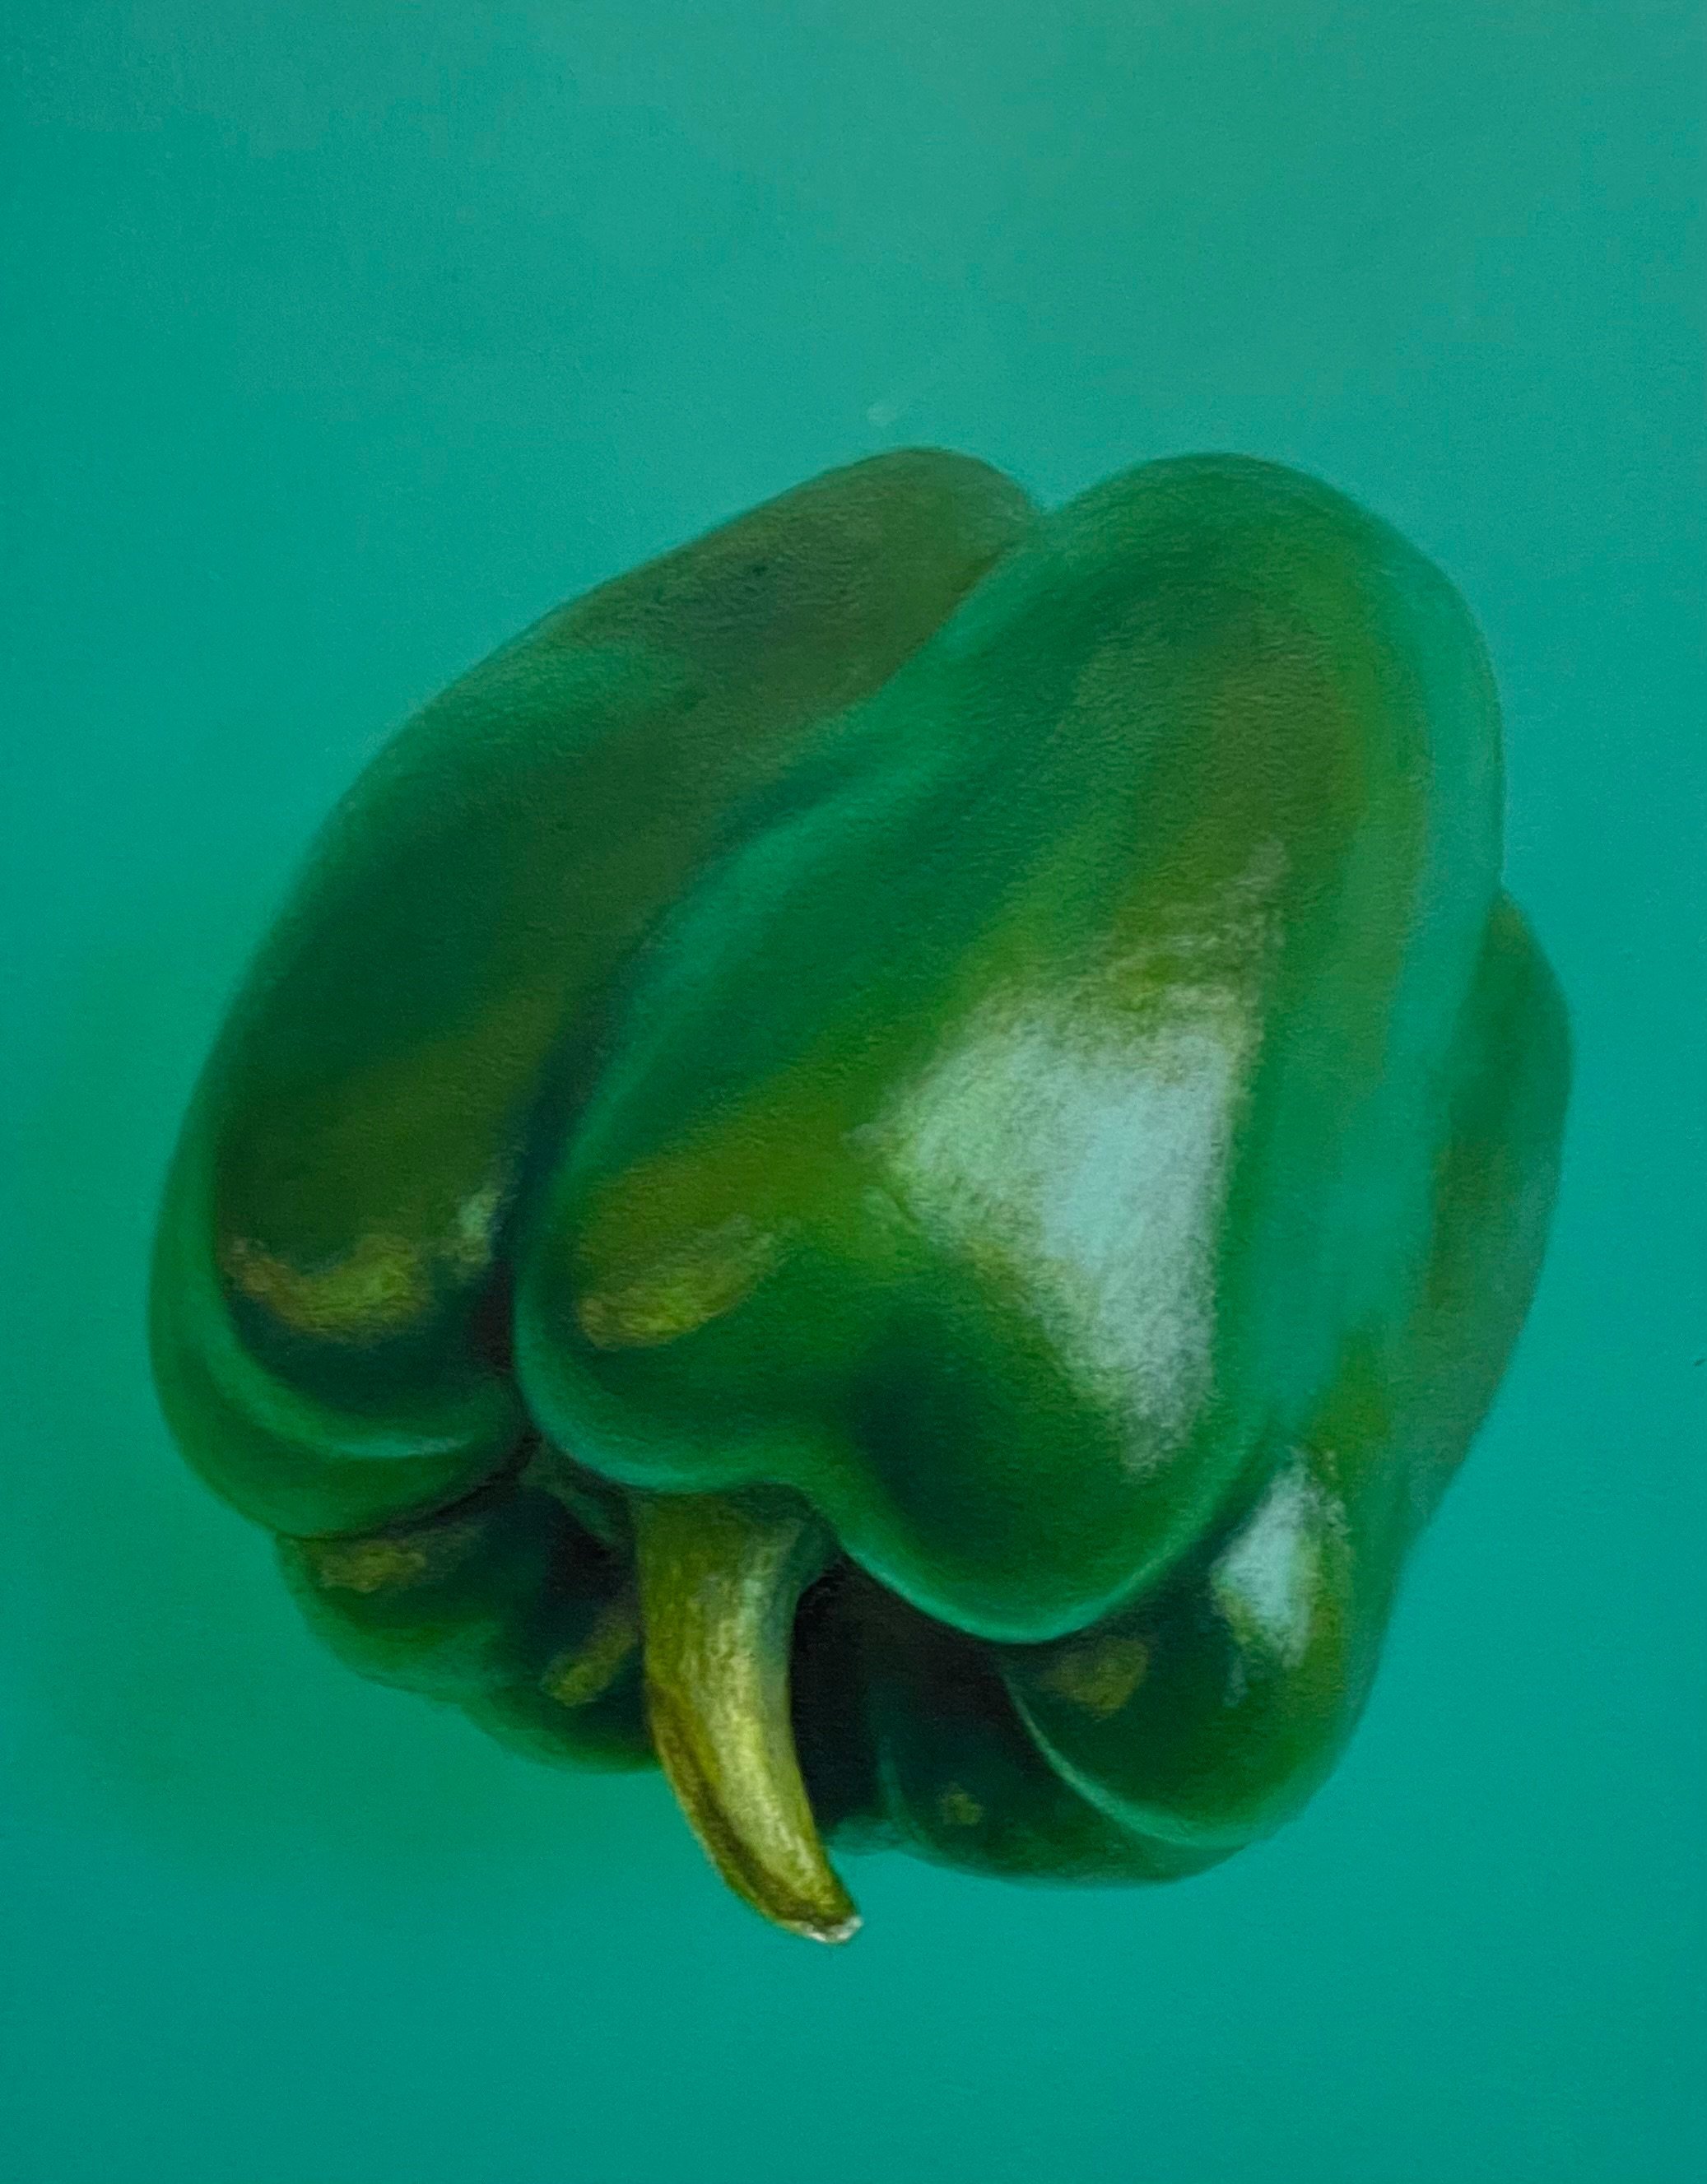 Green Pepper on Teal (sold)